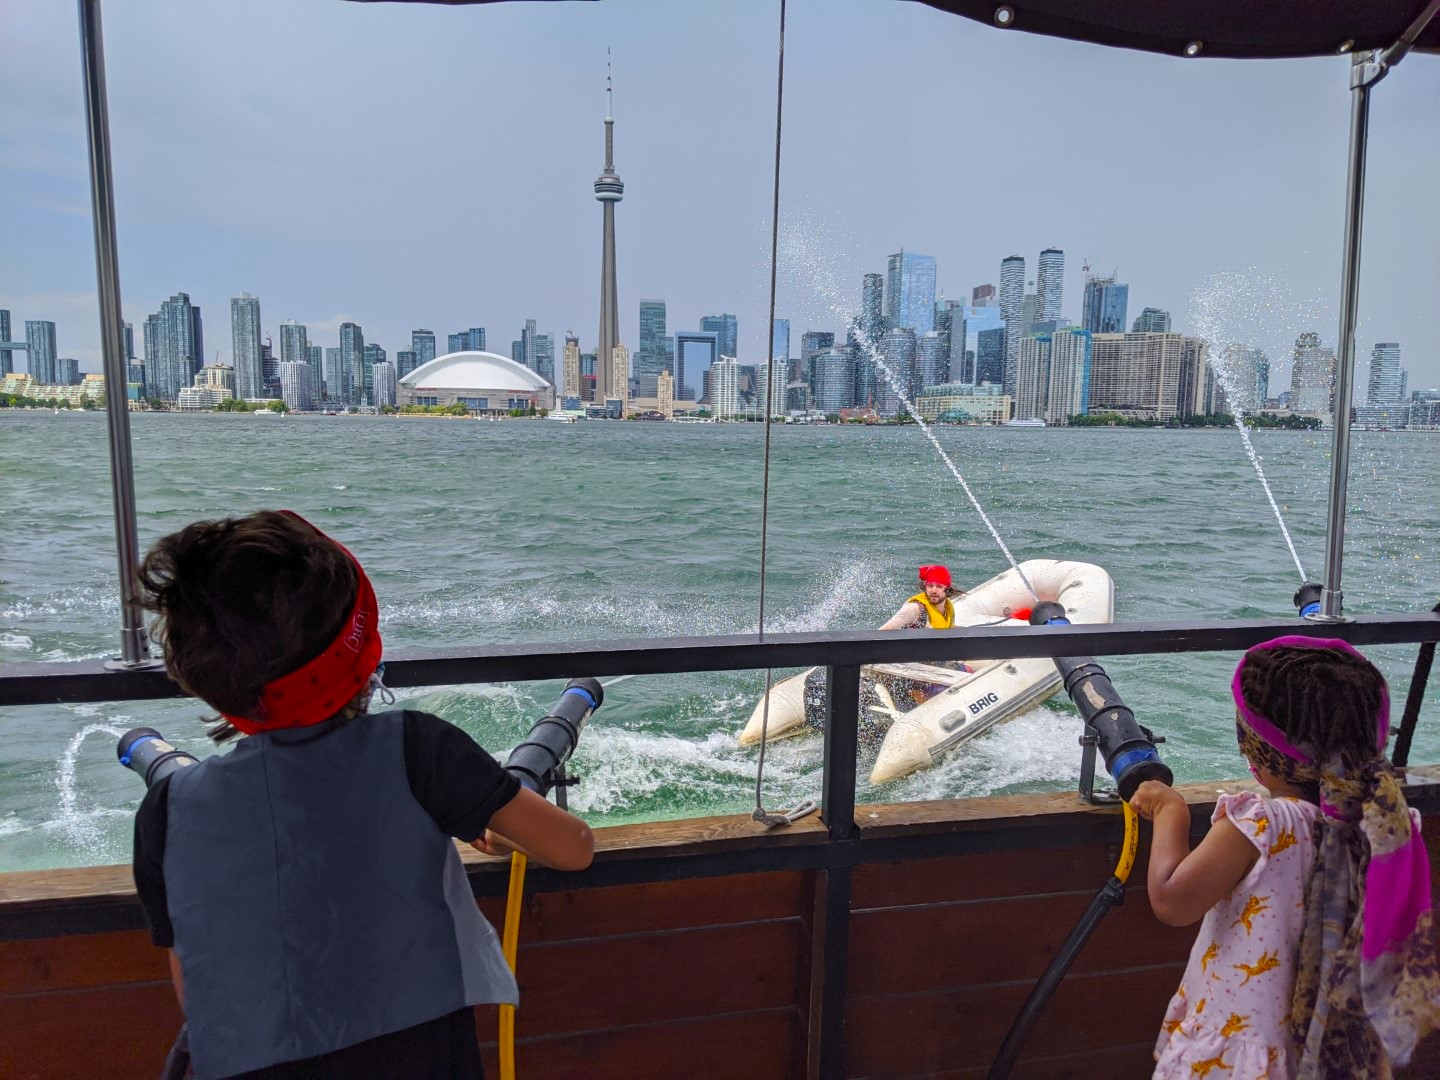 kids shooting pirate on boat in front of cn tower